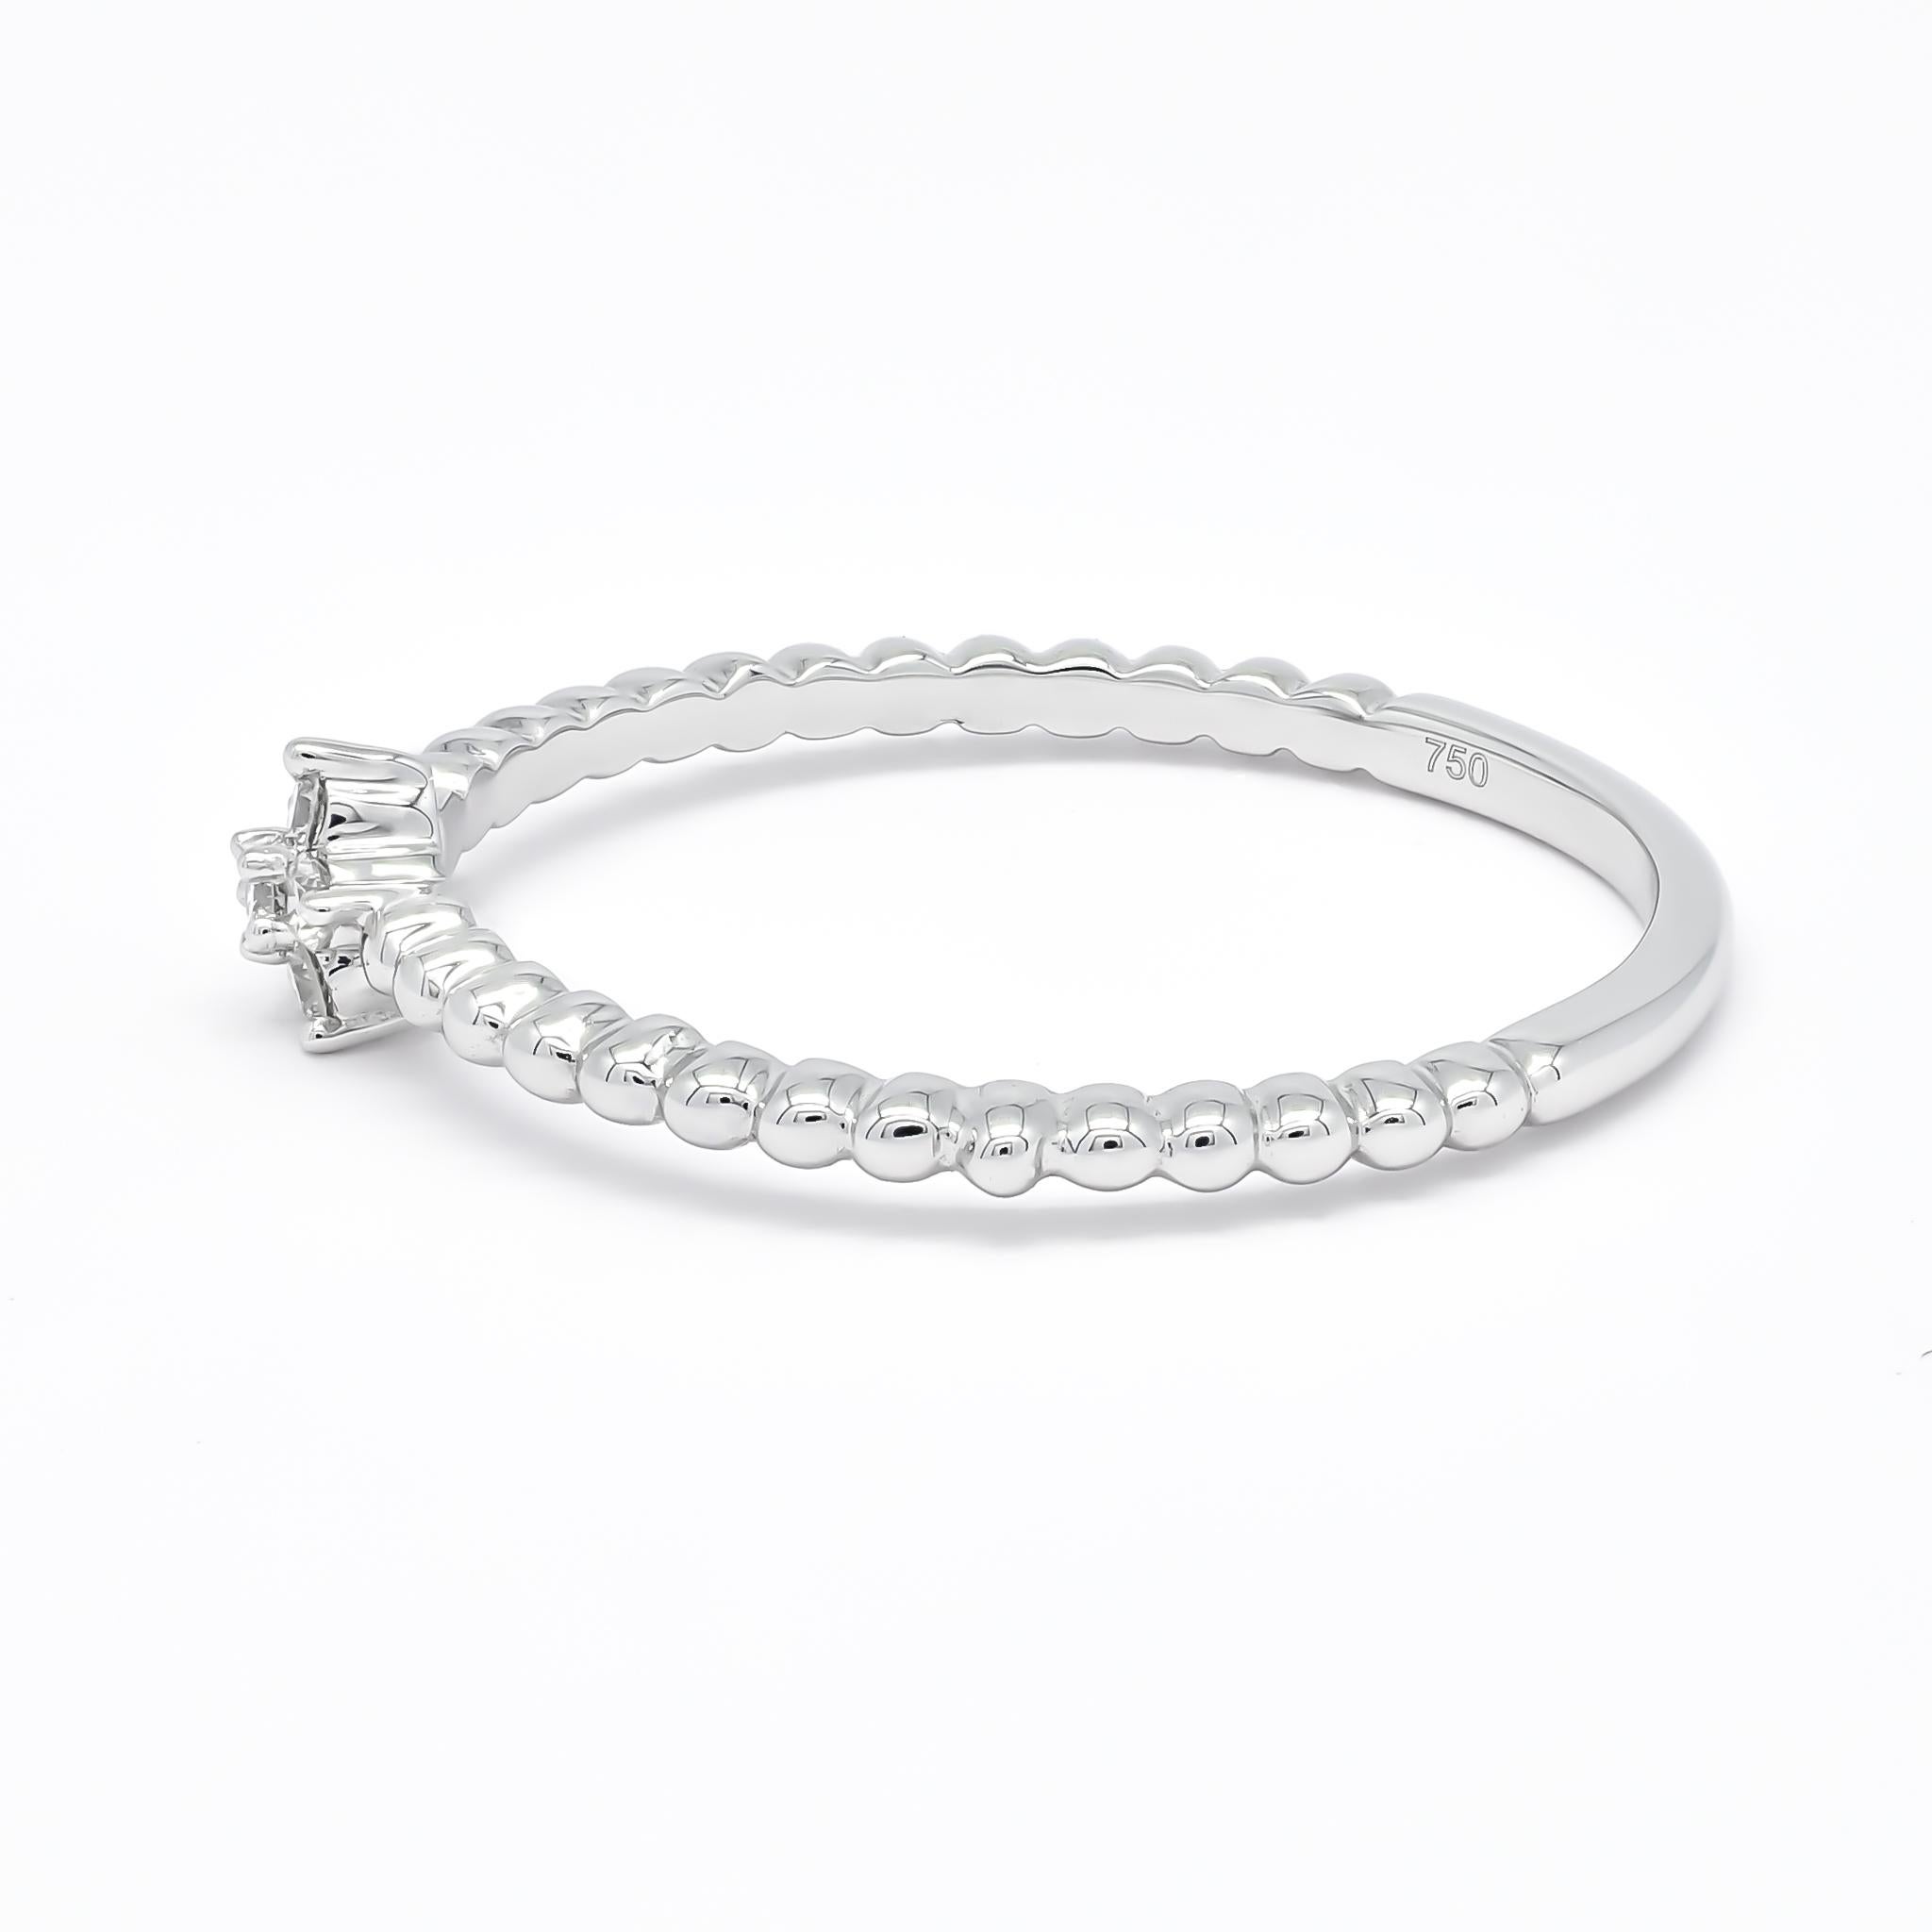 The flower cluster beaded shank petite simple ring is a delicate and charming piece of jewelry. It features a cluster of tiny flowers crafted from round brilliant diamond. The beaded shank band adds an extra touch of detail to the ring, giving it a